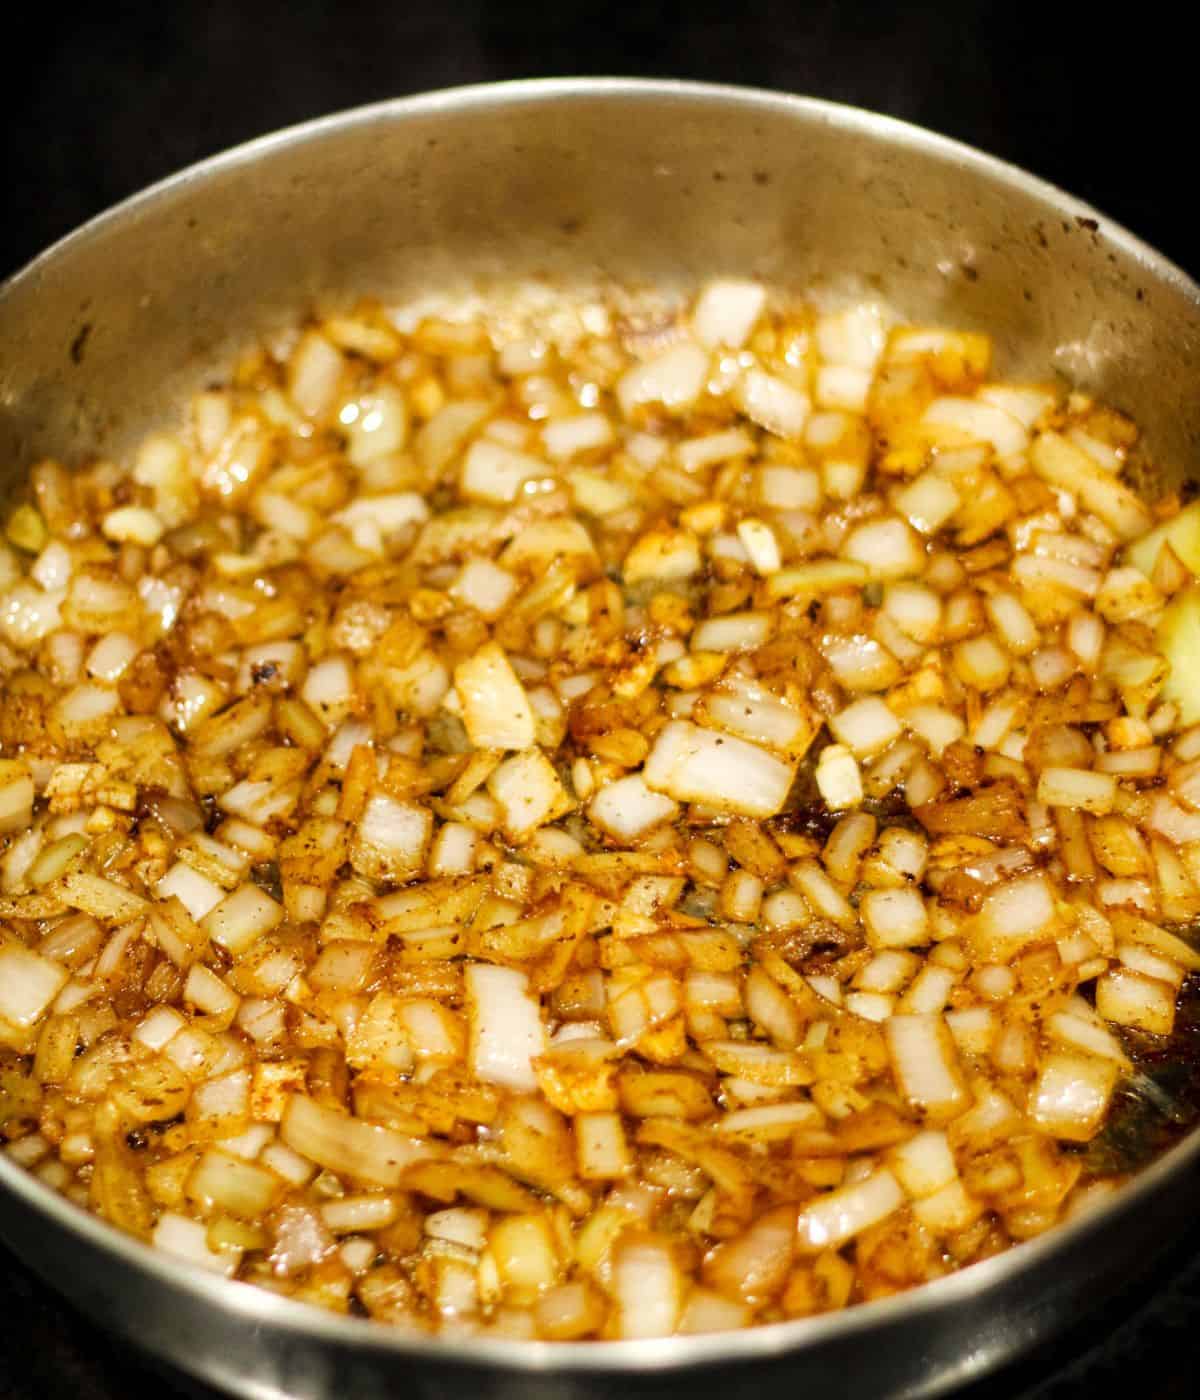 Cooking the garlic and the onion.